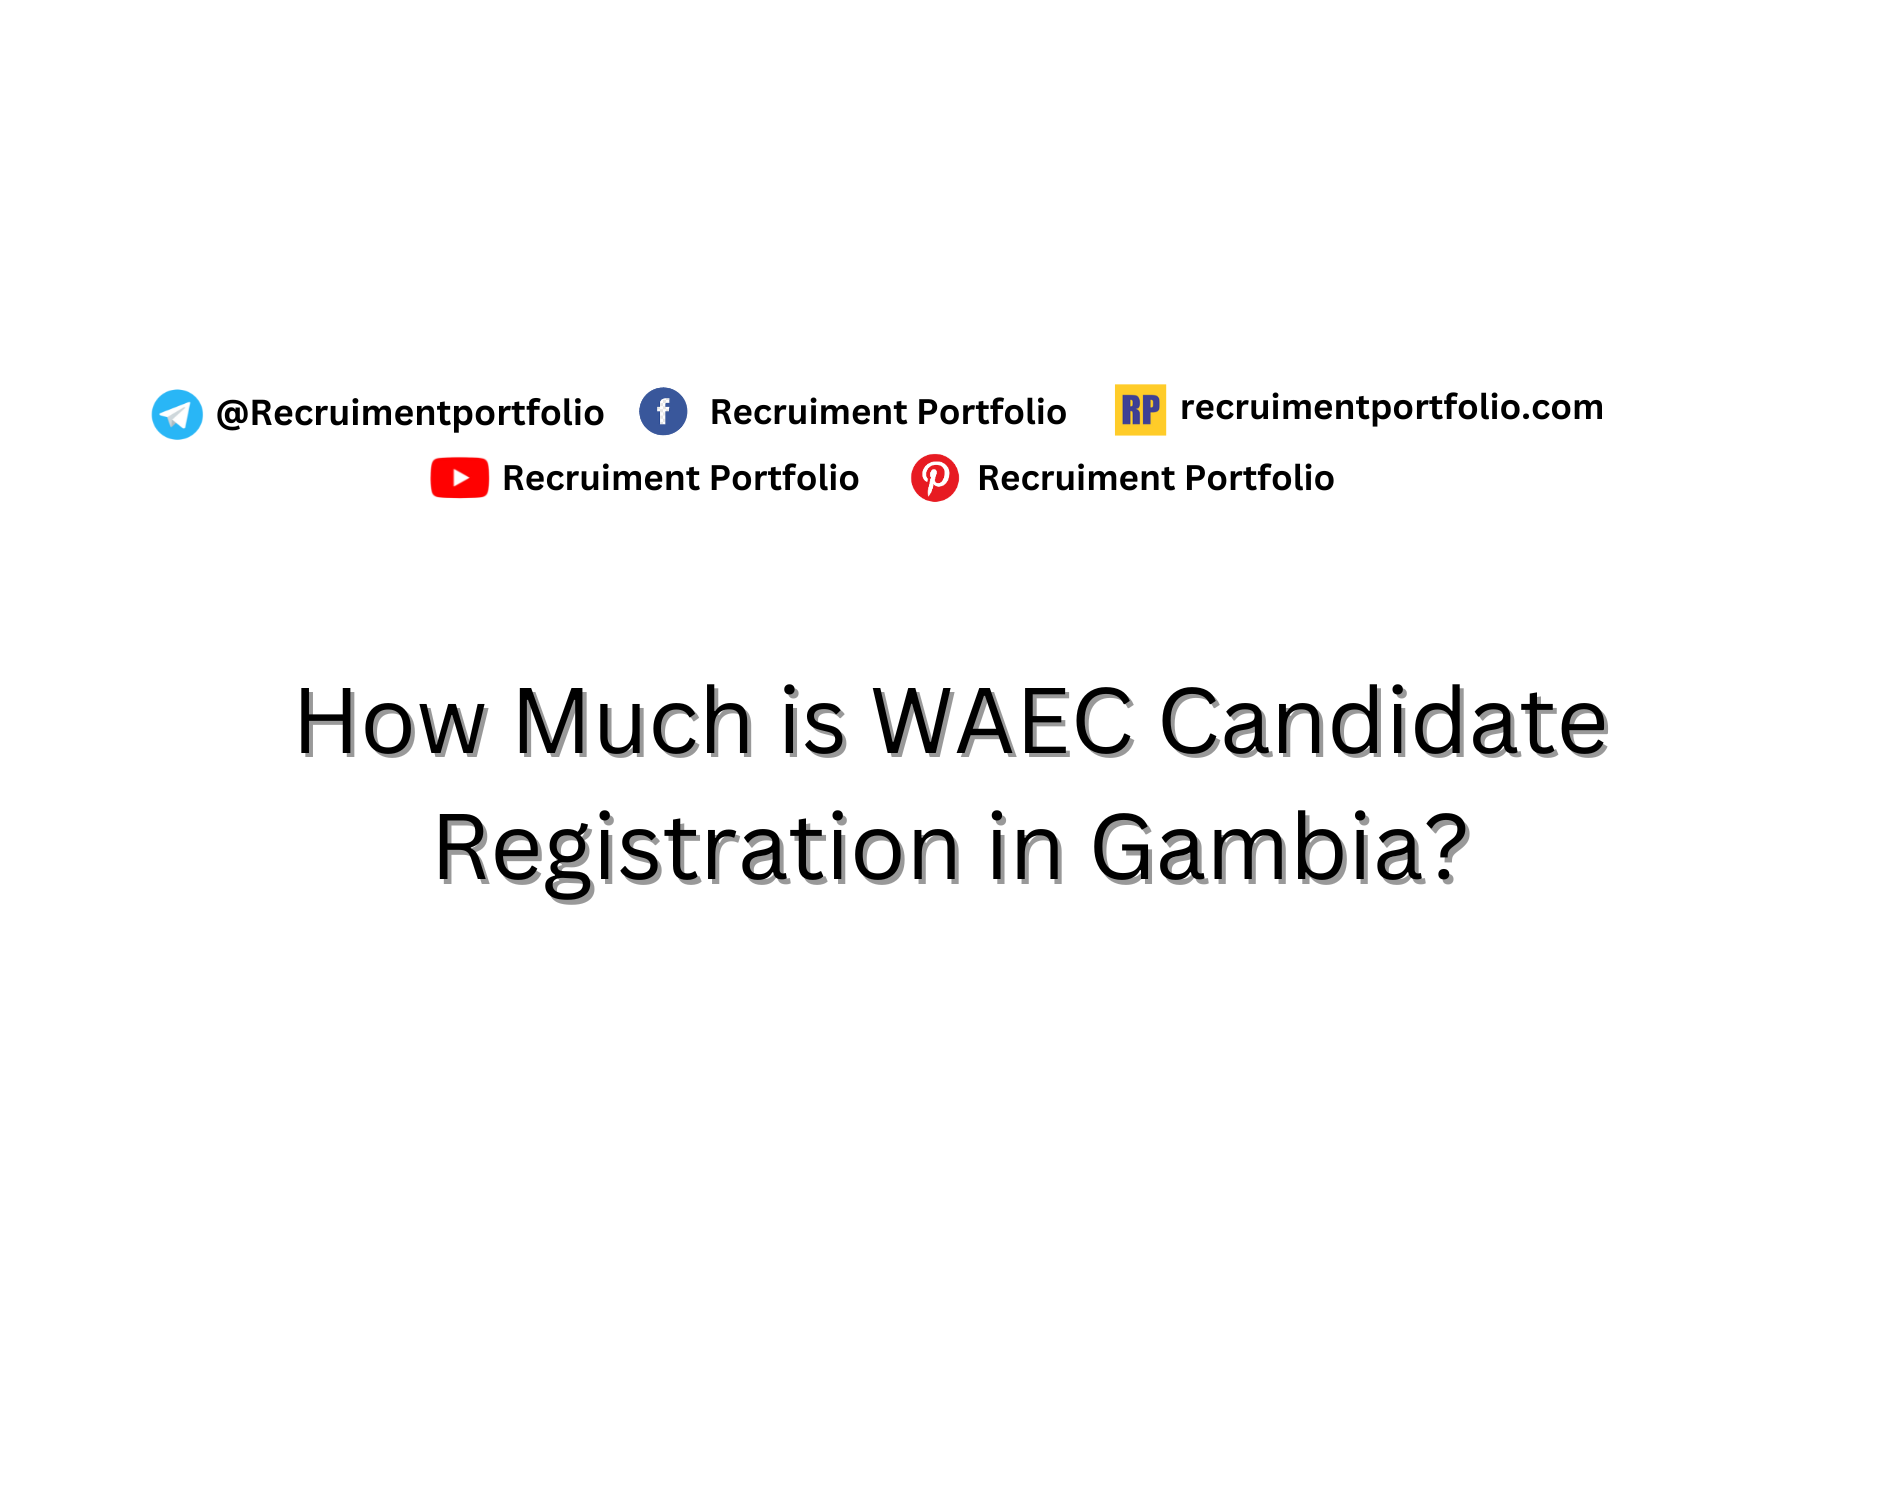 How Much is WAEC Candidate Registration in Gambia?